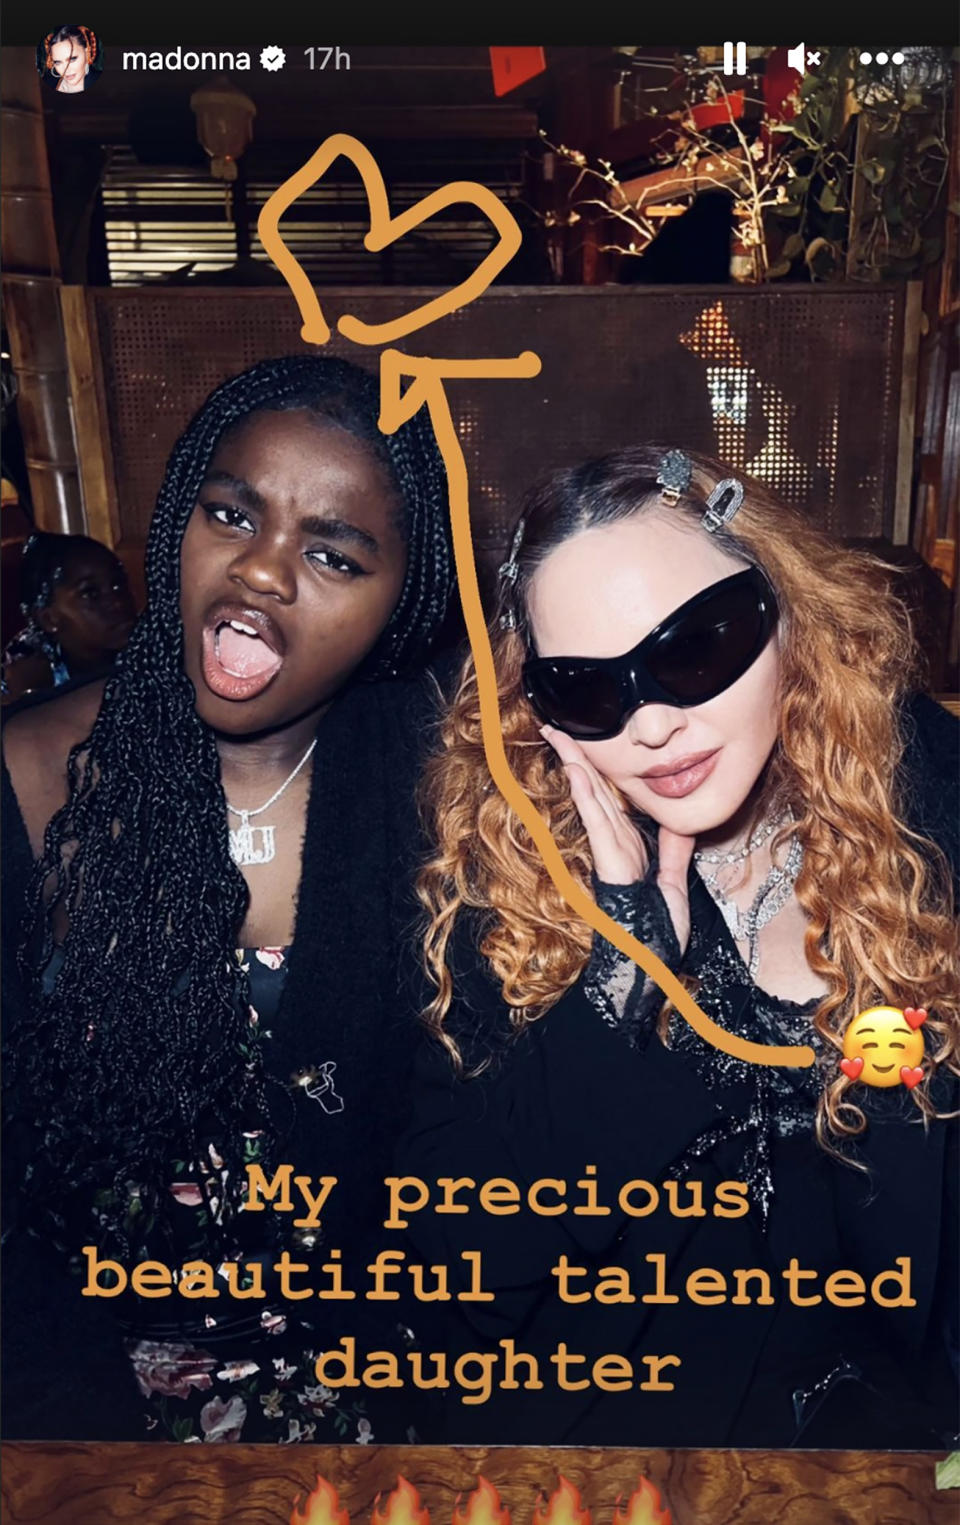 Madonna shares a sweet picture of her and her daughter Mercy James together. (@madonna via Instagram)